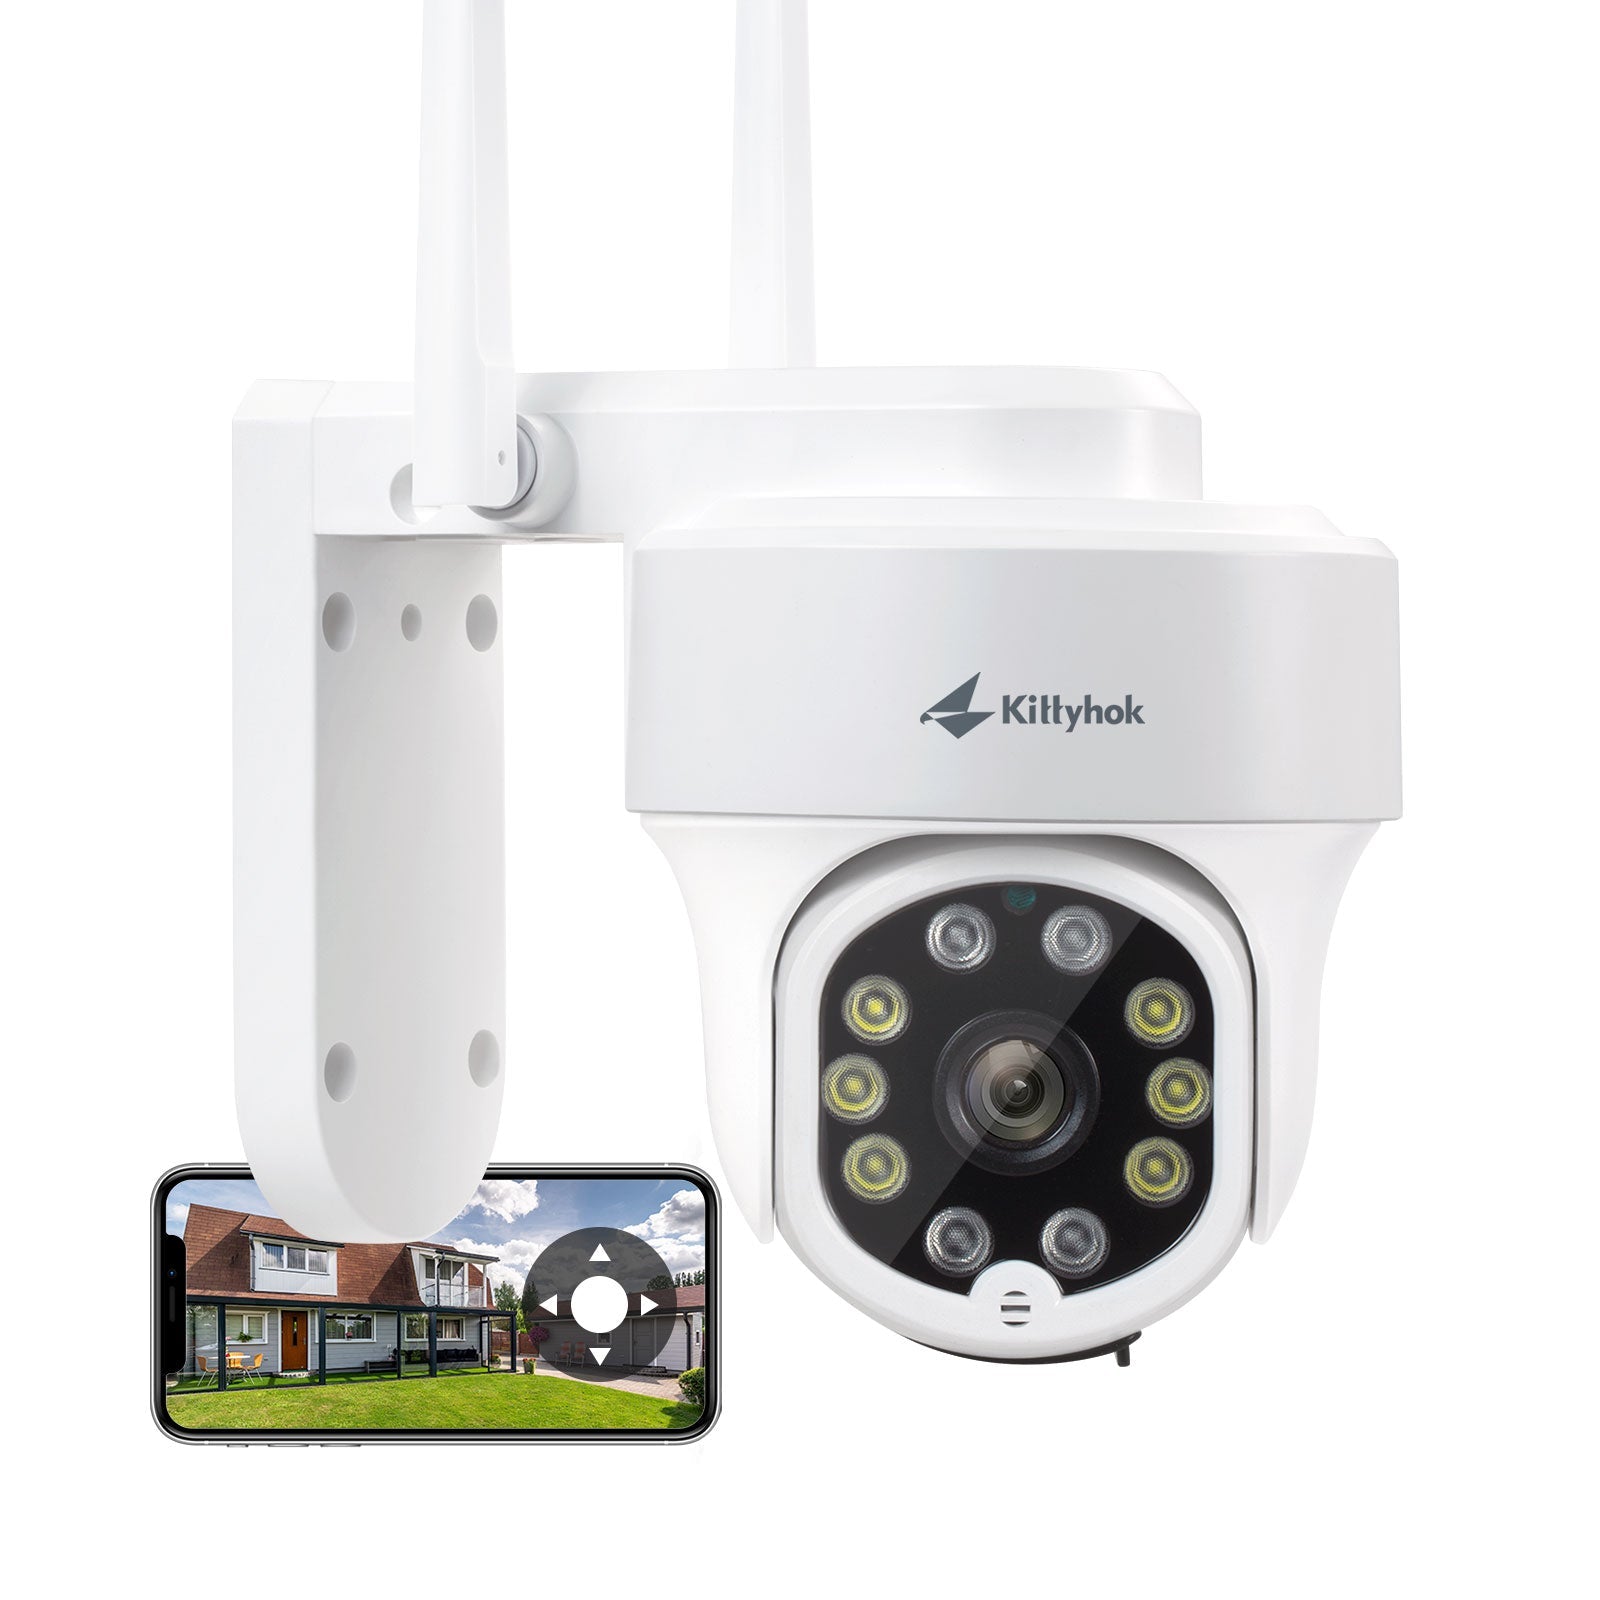 2K FHD Wireless Cameras for Home Security with 360 Viewing, Auto Tracking, Spotilght